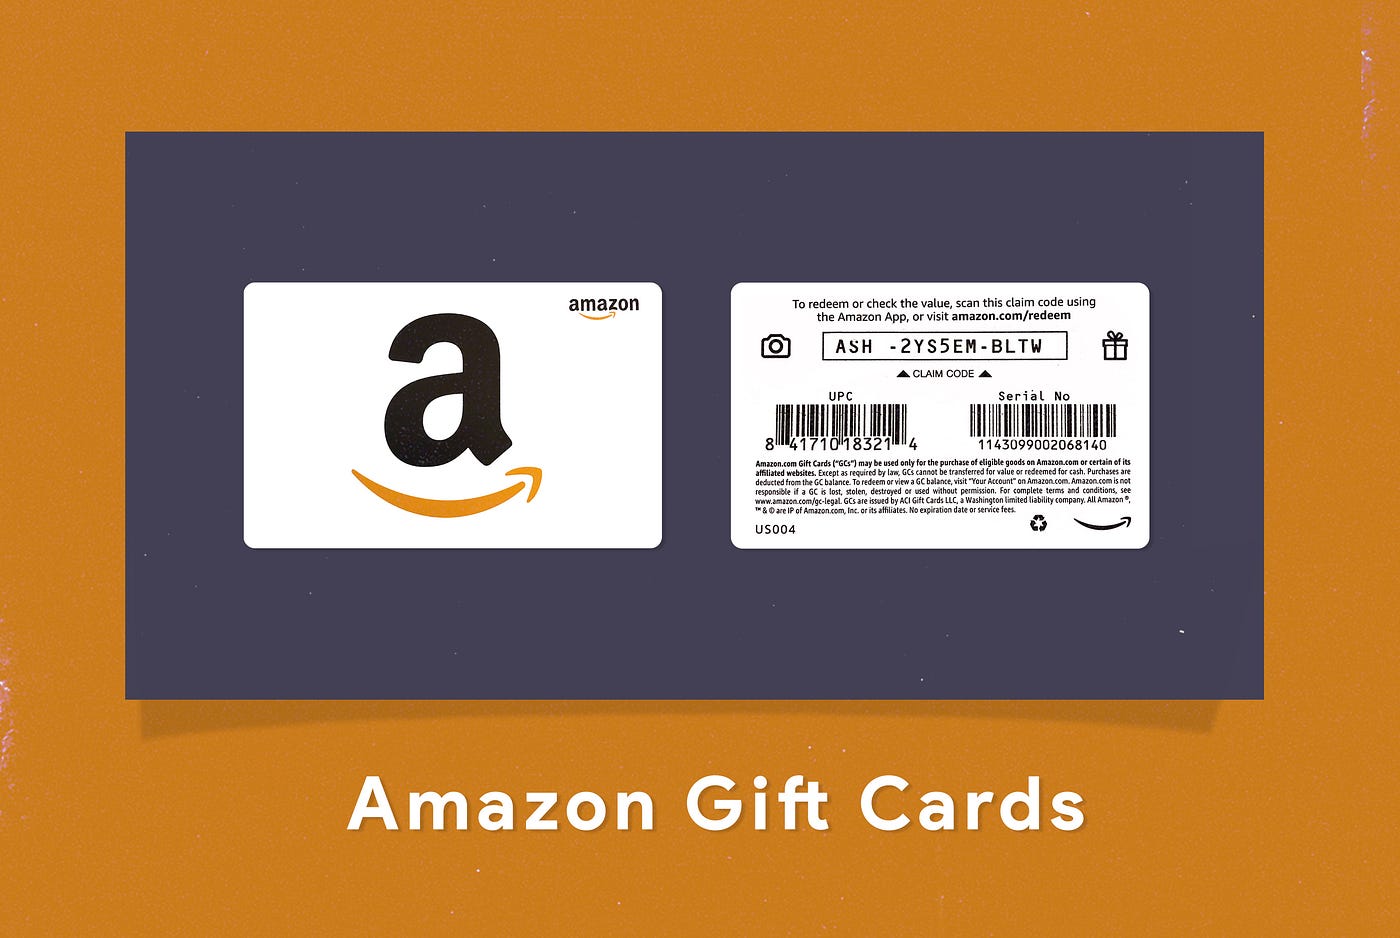 How to Redeem  Gift Card